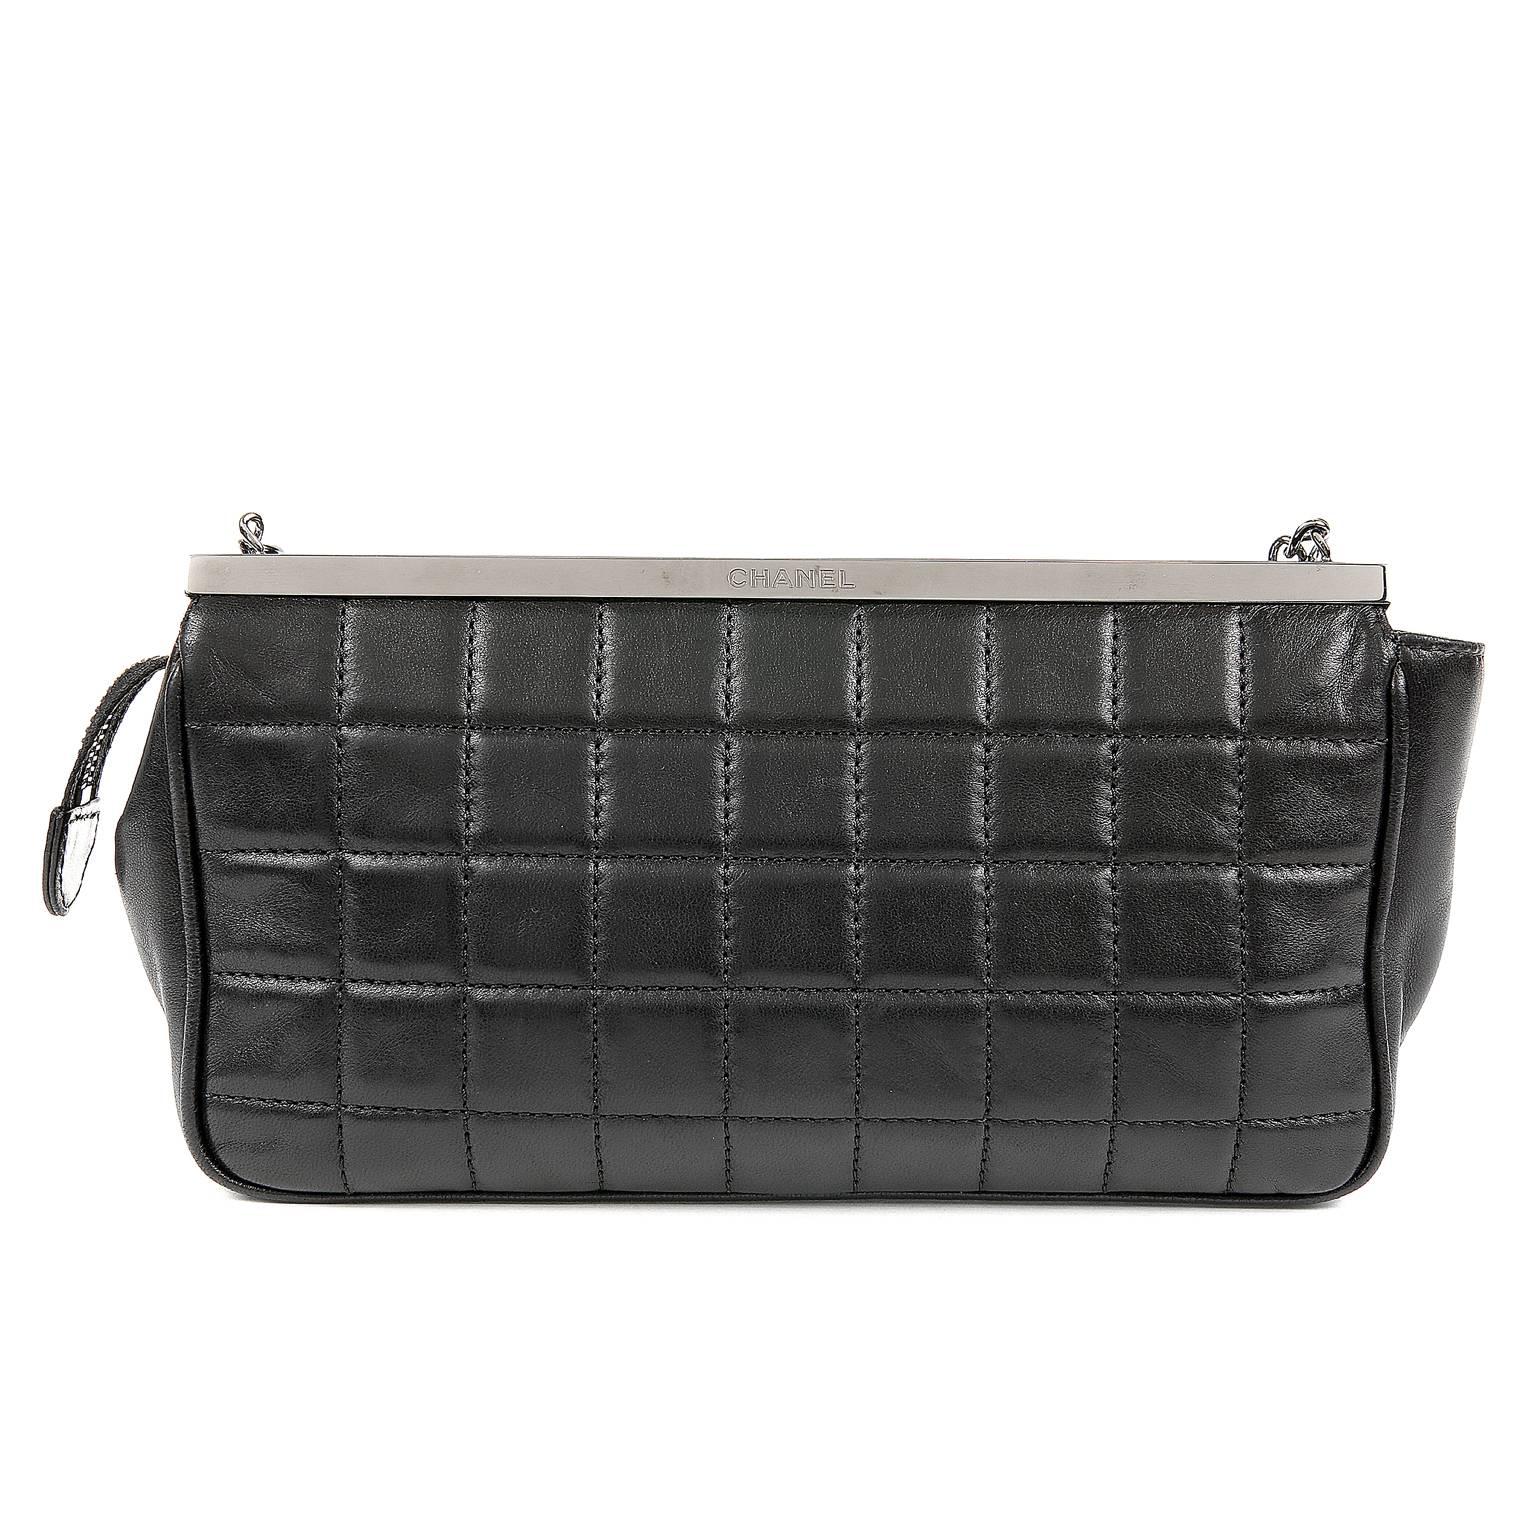 Chanel Black Lambskin Dripping Chains Evening Bag- MINT 
 Highly collectible piece; RARE

Black lambskin is quilted in square quilt pattern.  Framed top with secure zipper access.  Silver chains of varying lengths and link style literally drip from